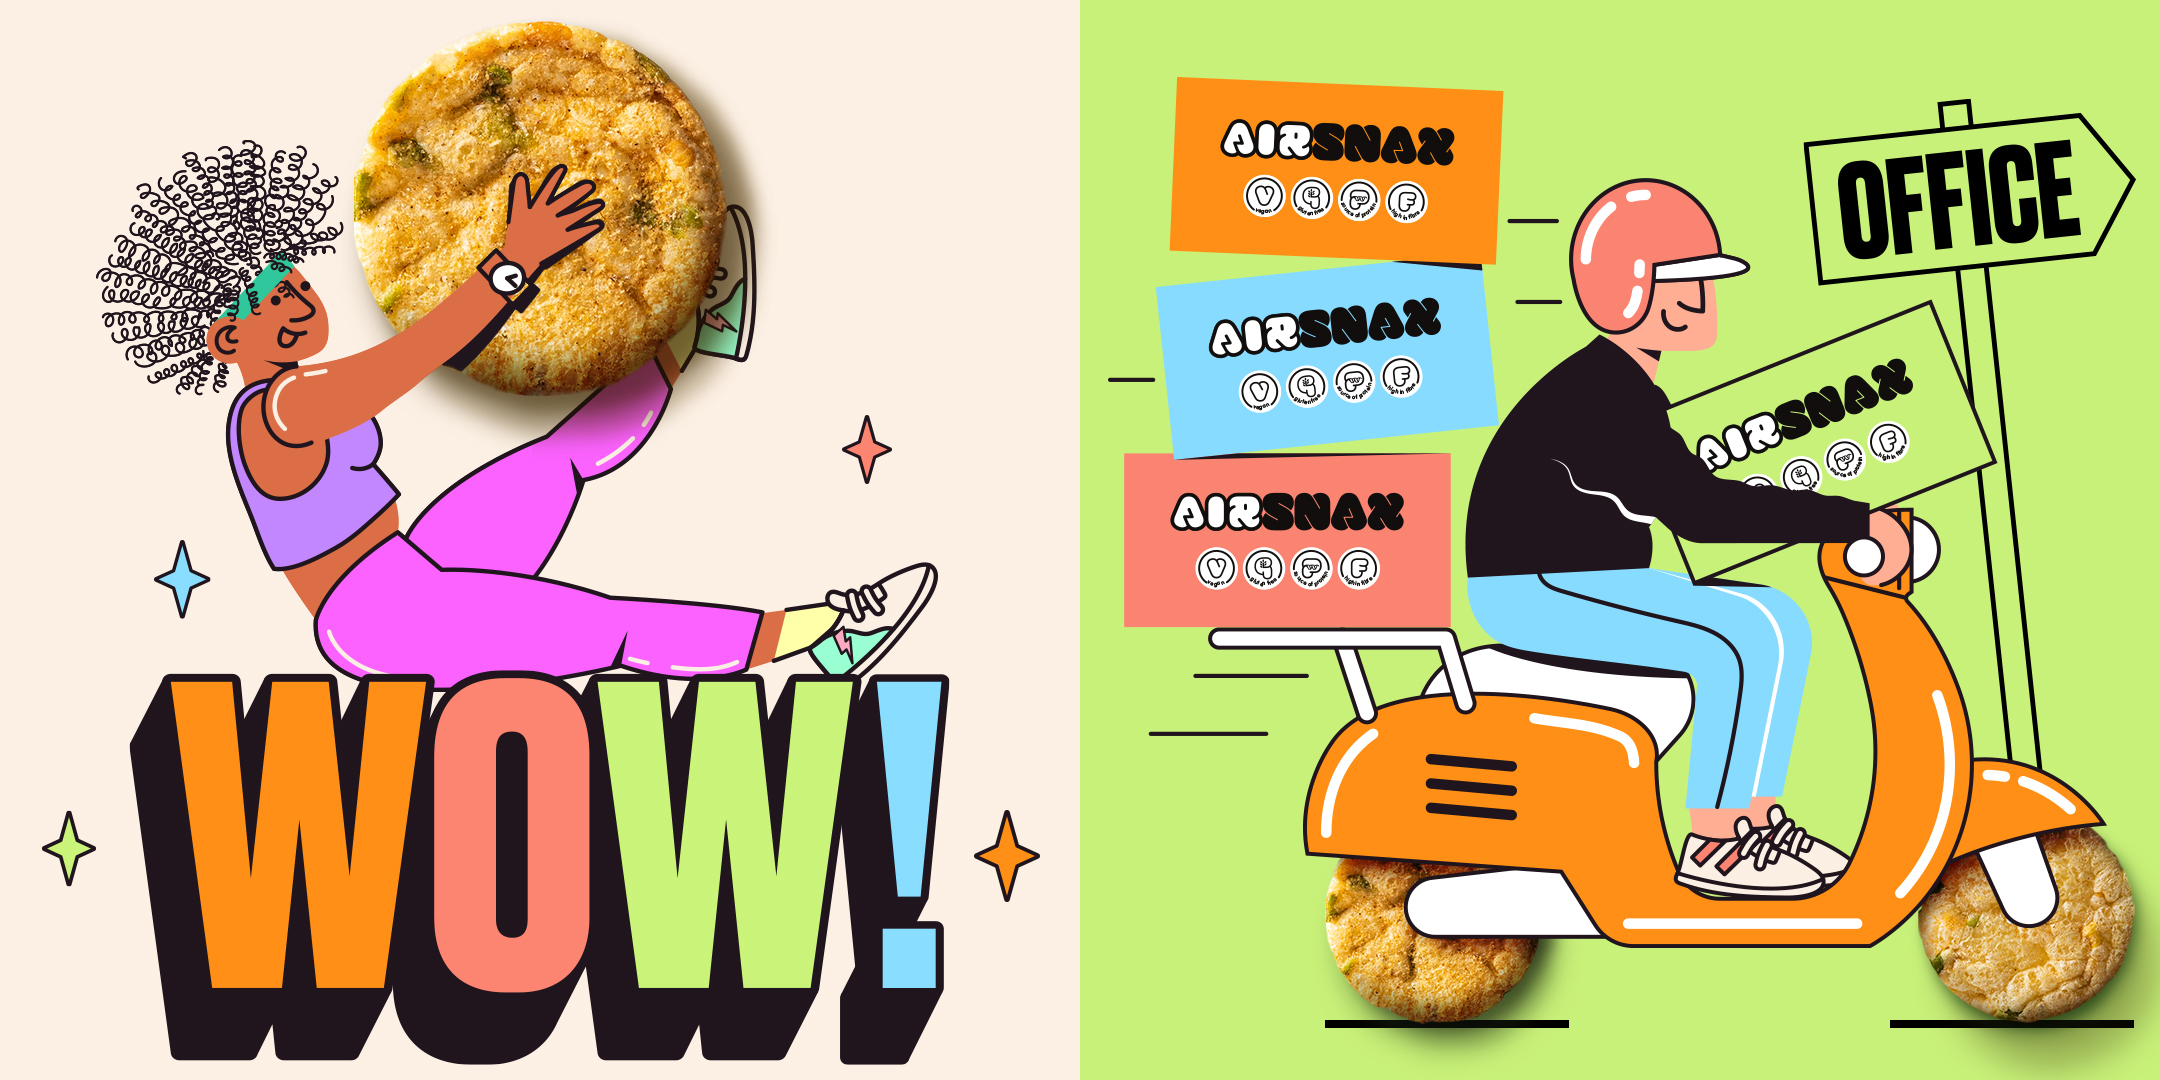 Illustrations created by Farrows for the brand Airsnax, using bright colours and a fun style, the Airnsax product is used within the illustration